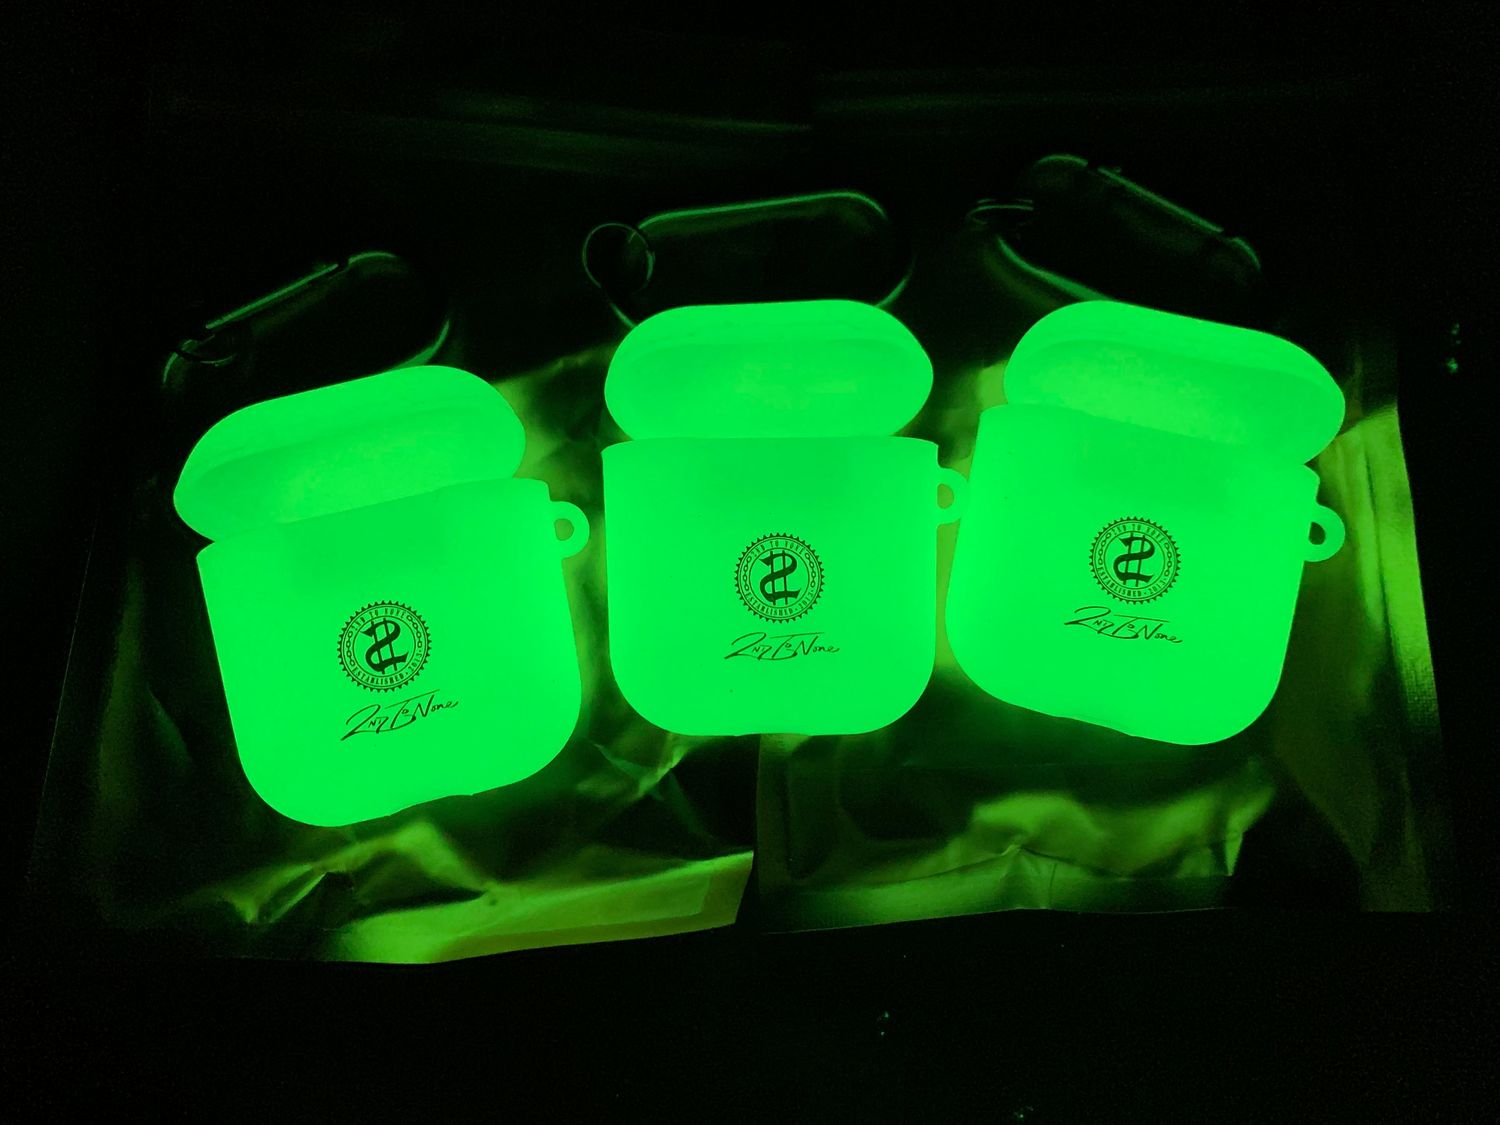 catalyst-announces-glow-in-the-dark-airpod-cases